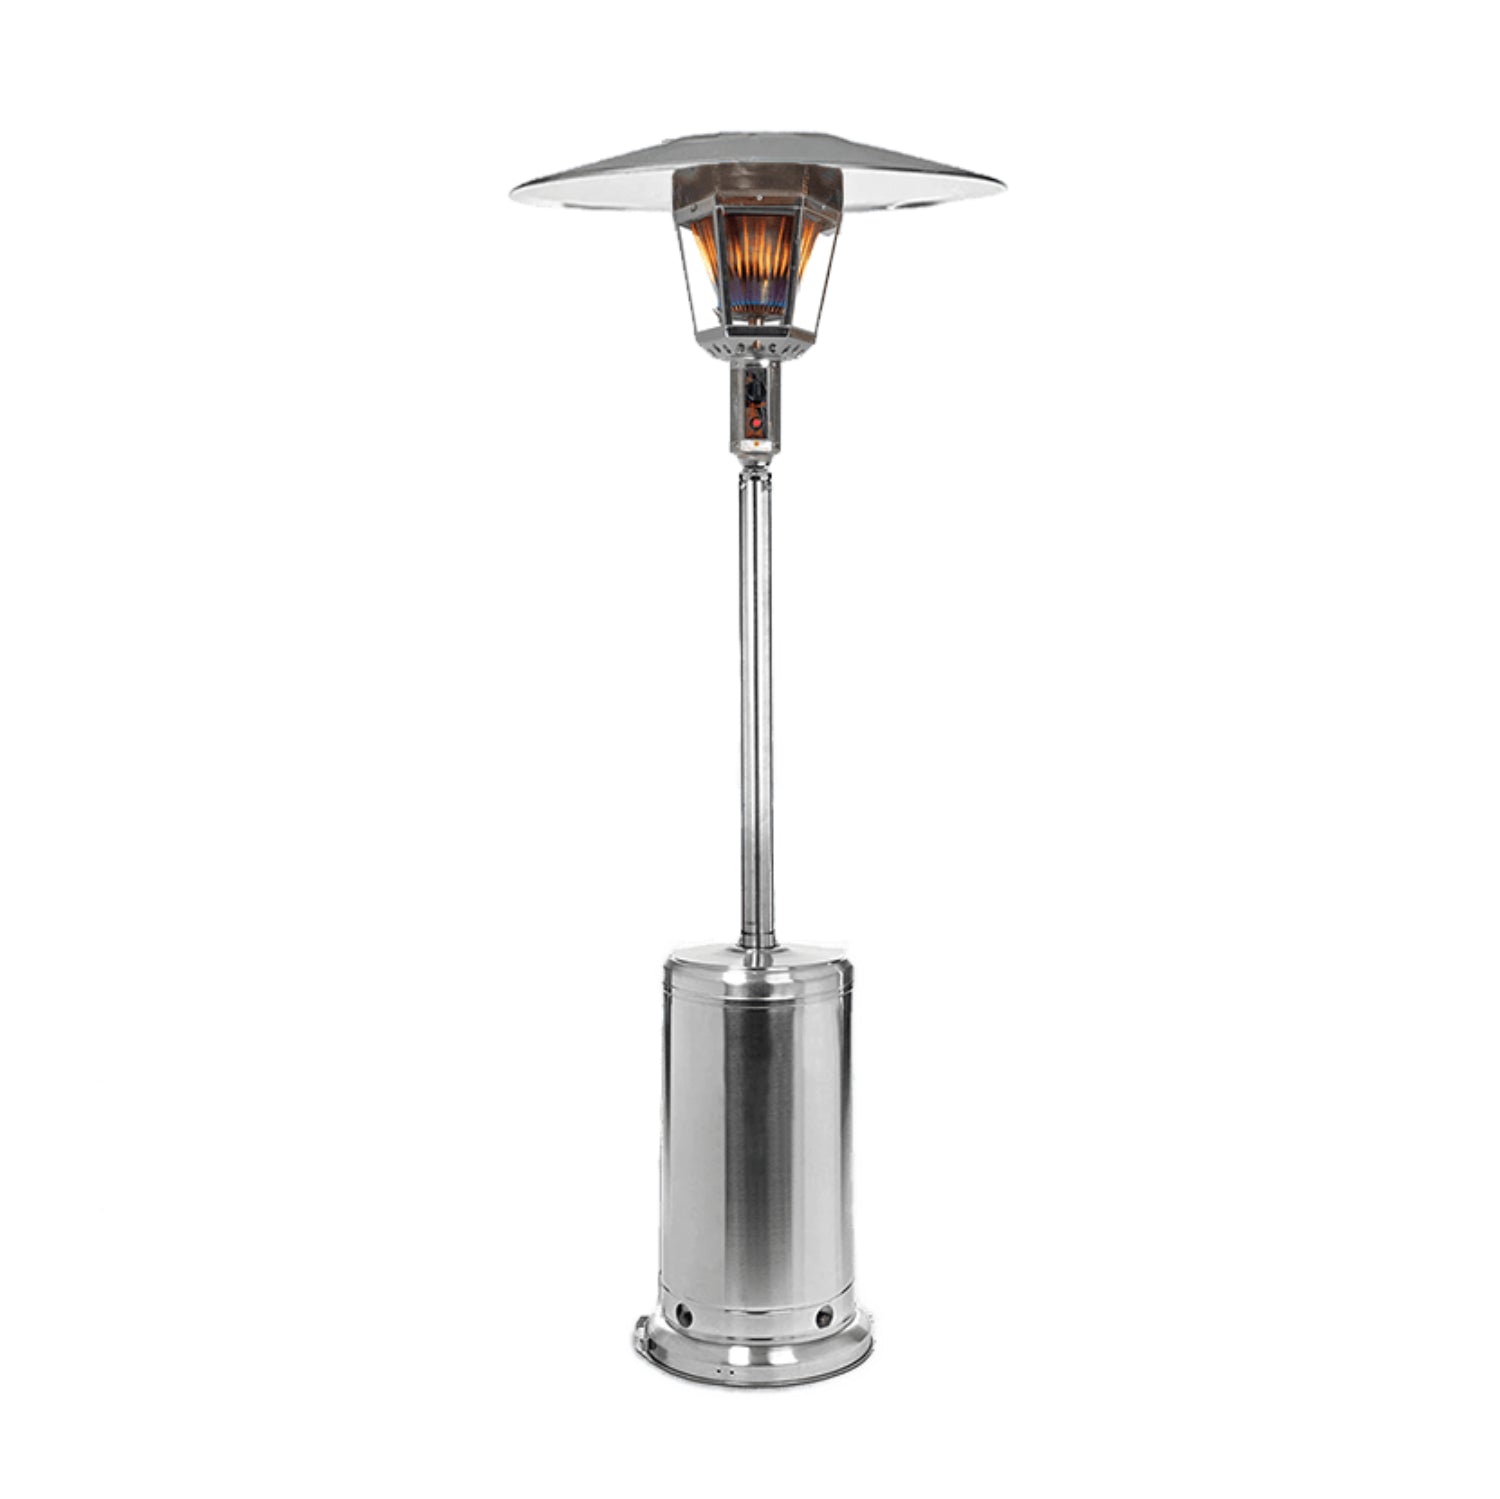 RADtec 96 Real Flame Natural Gas Patio Heater - Stainless Steel Finish 40,000 BTU  - 96-NTR-GAS-SS - Main View